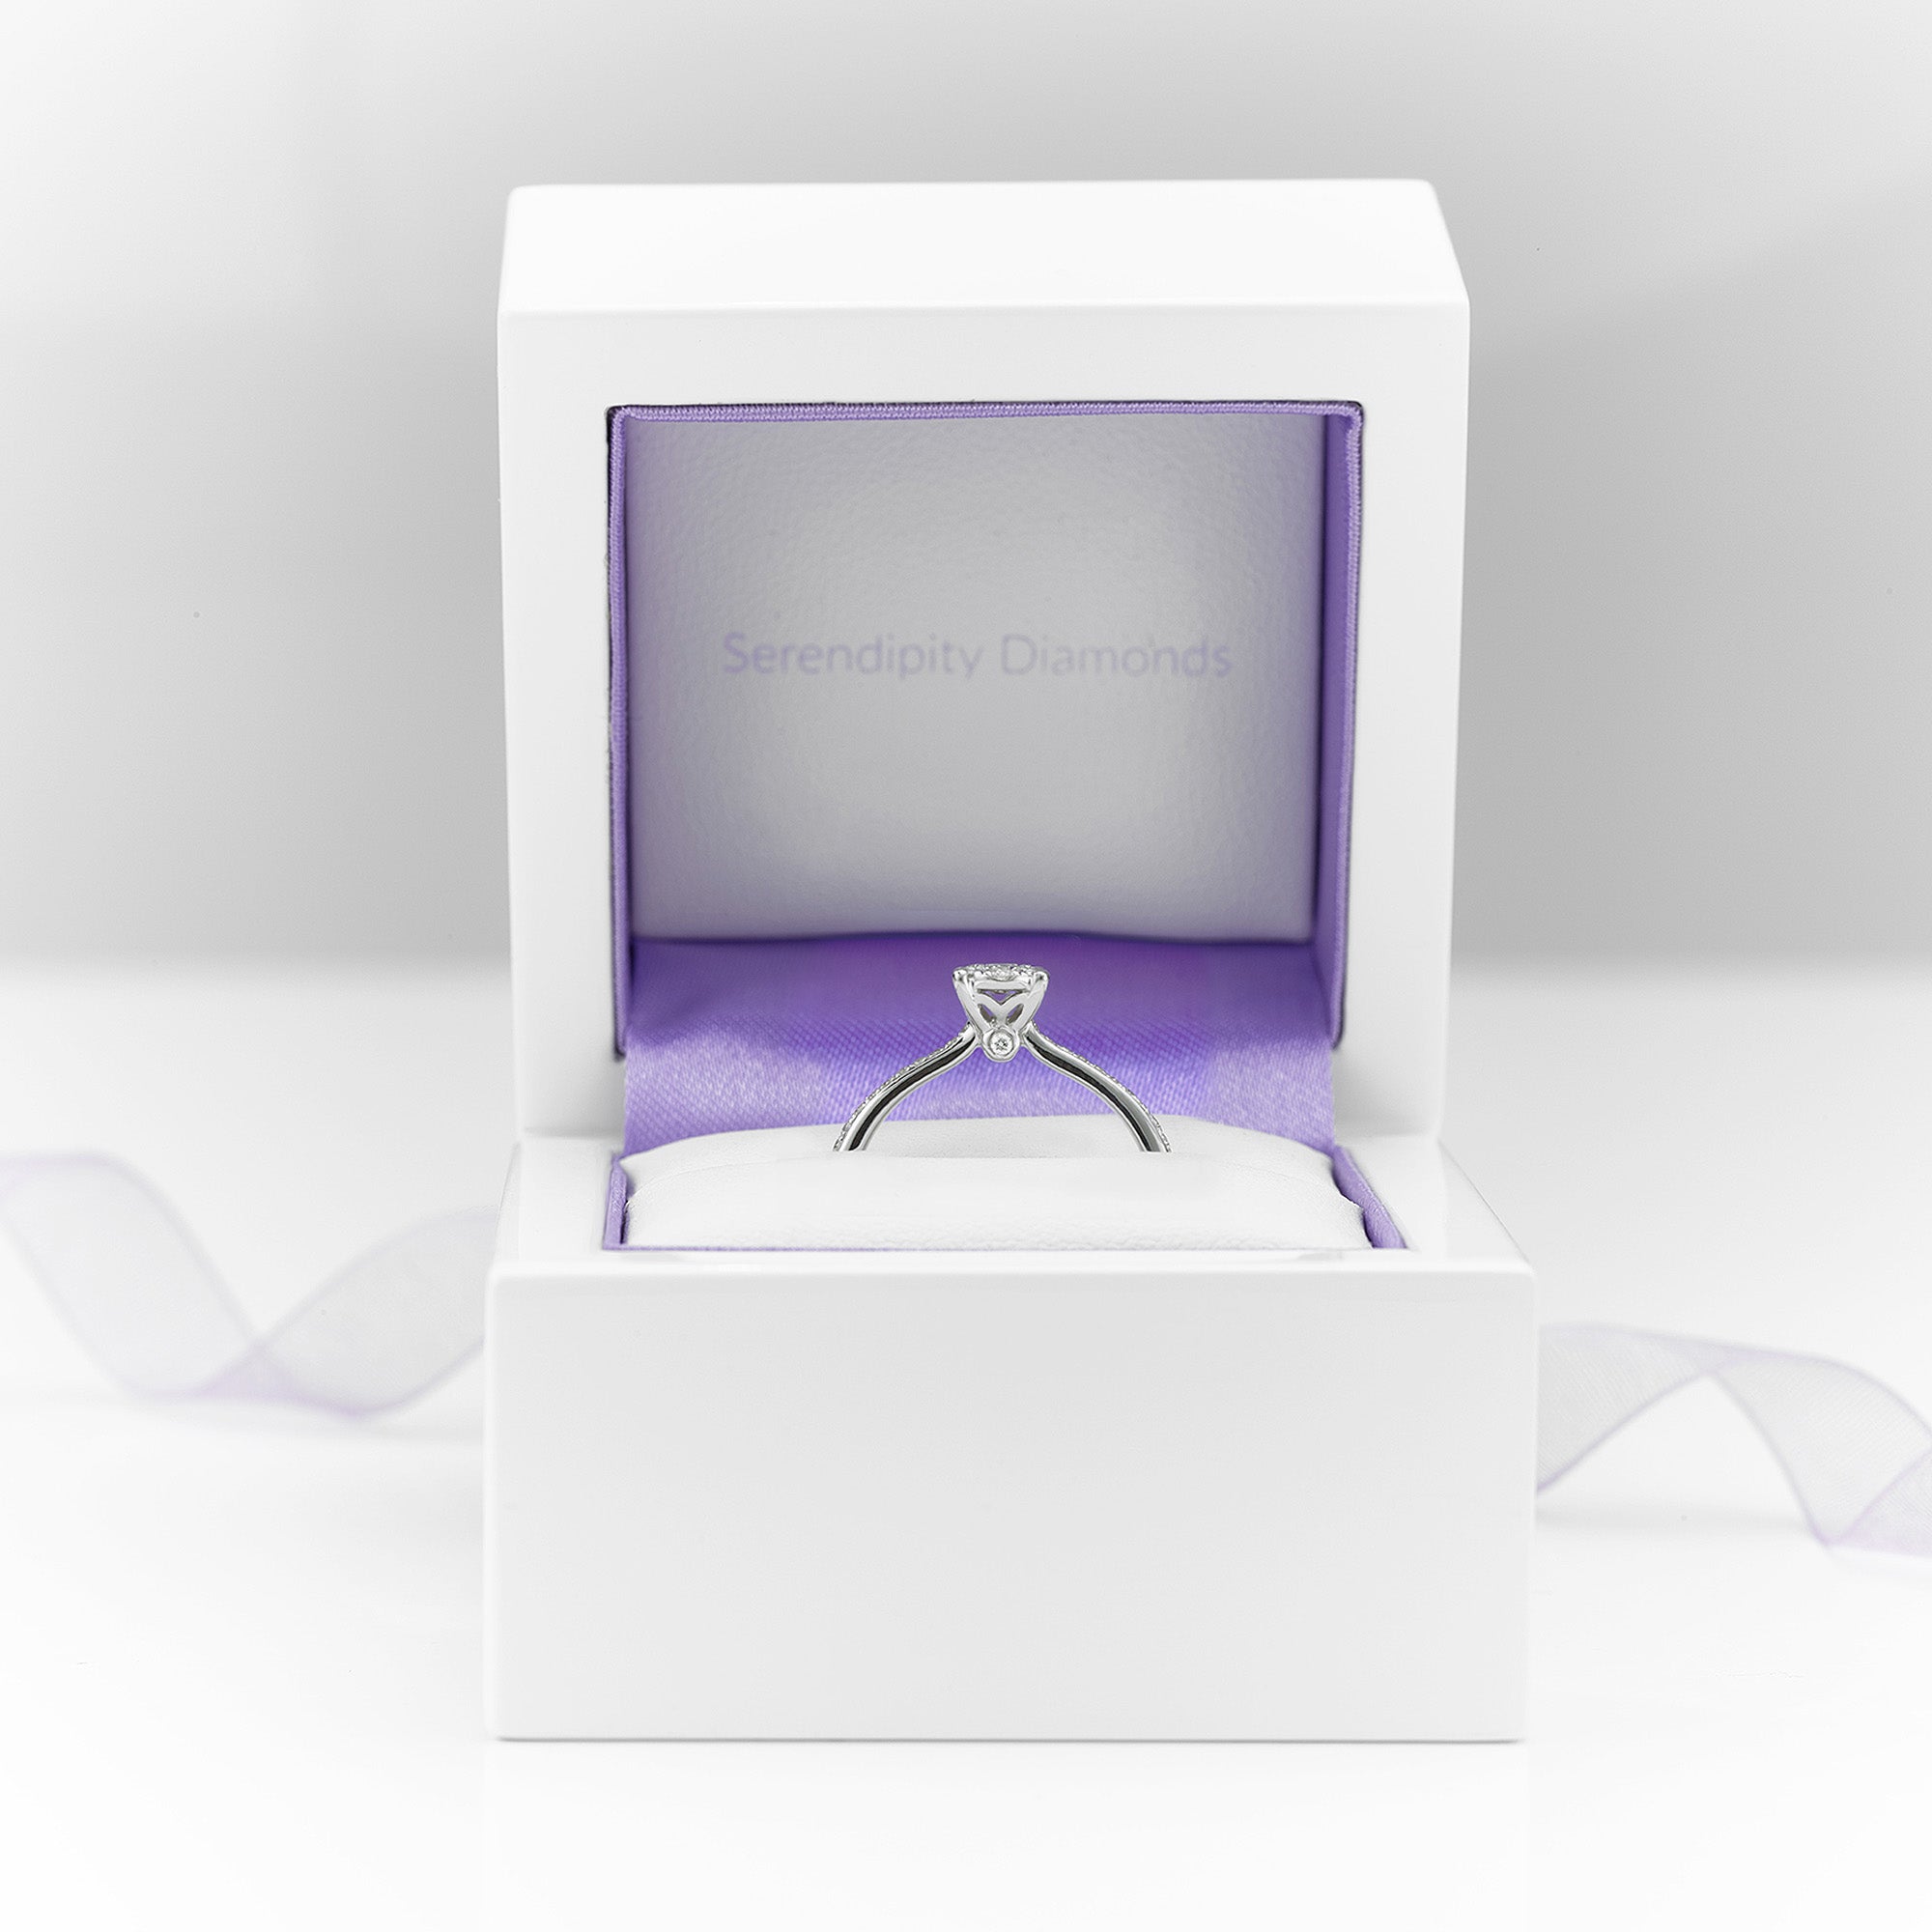 Illusion cluster engagement ring shown in ring box